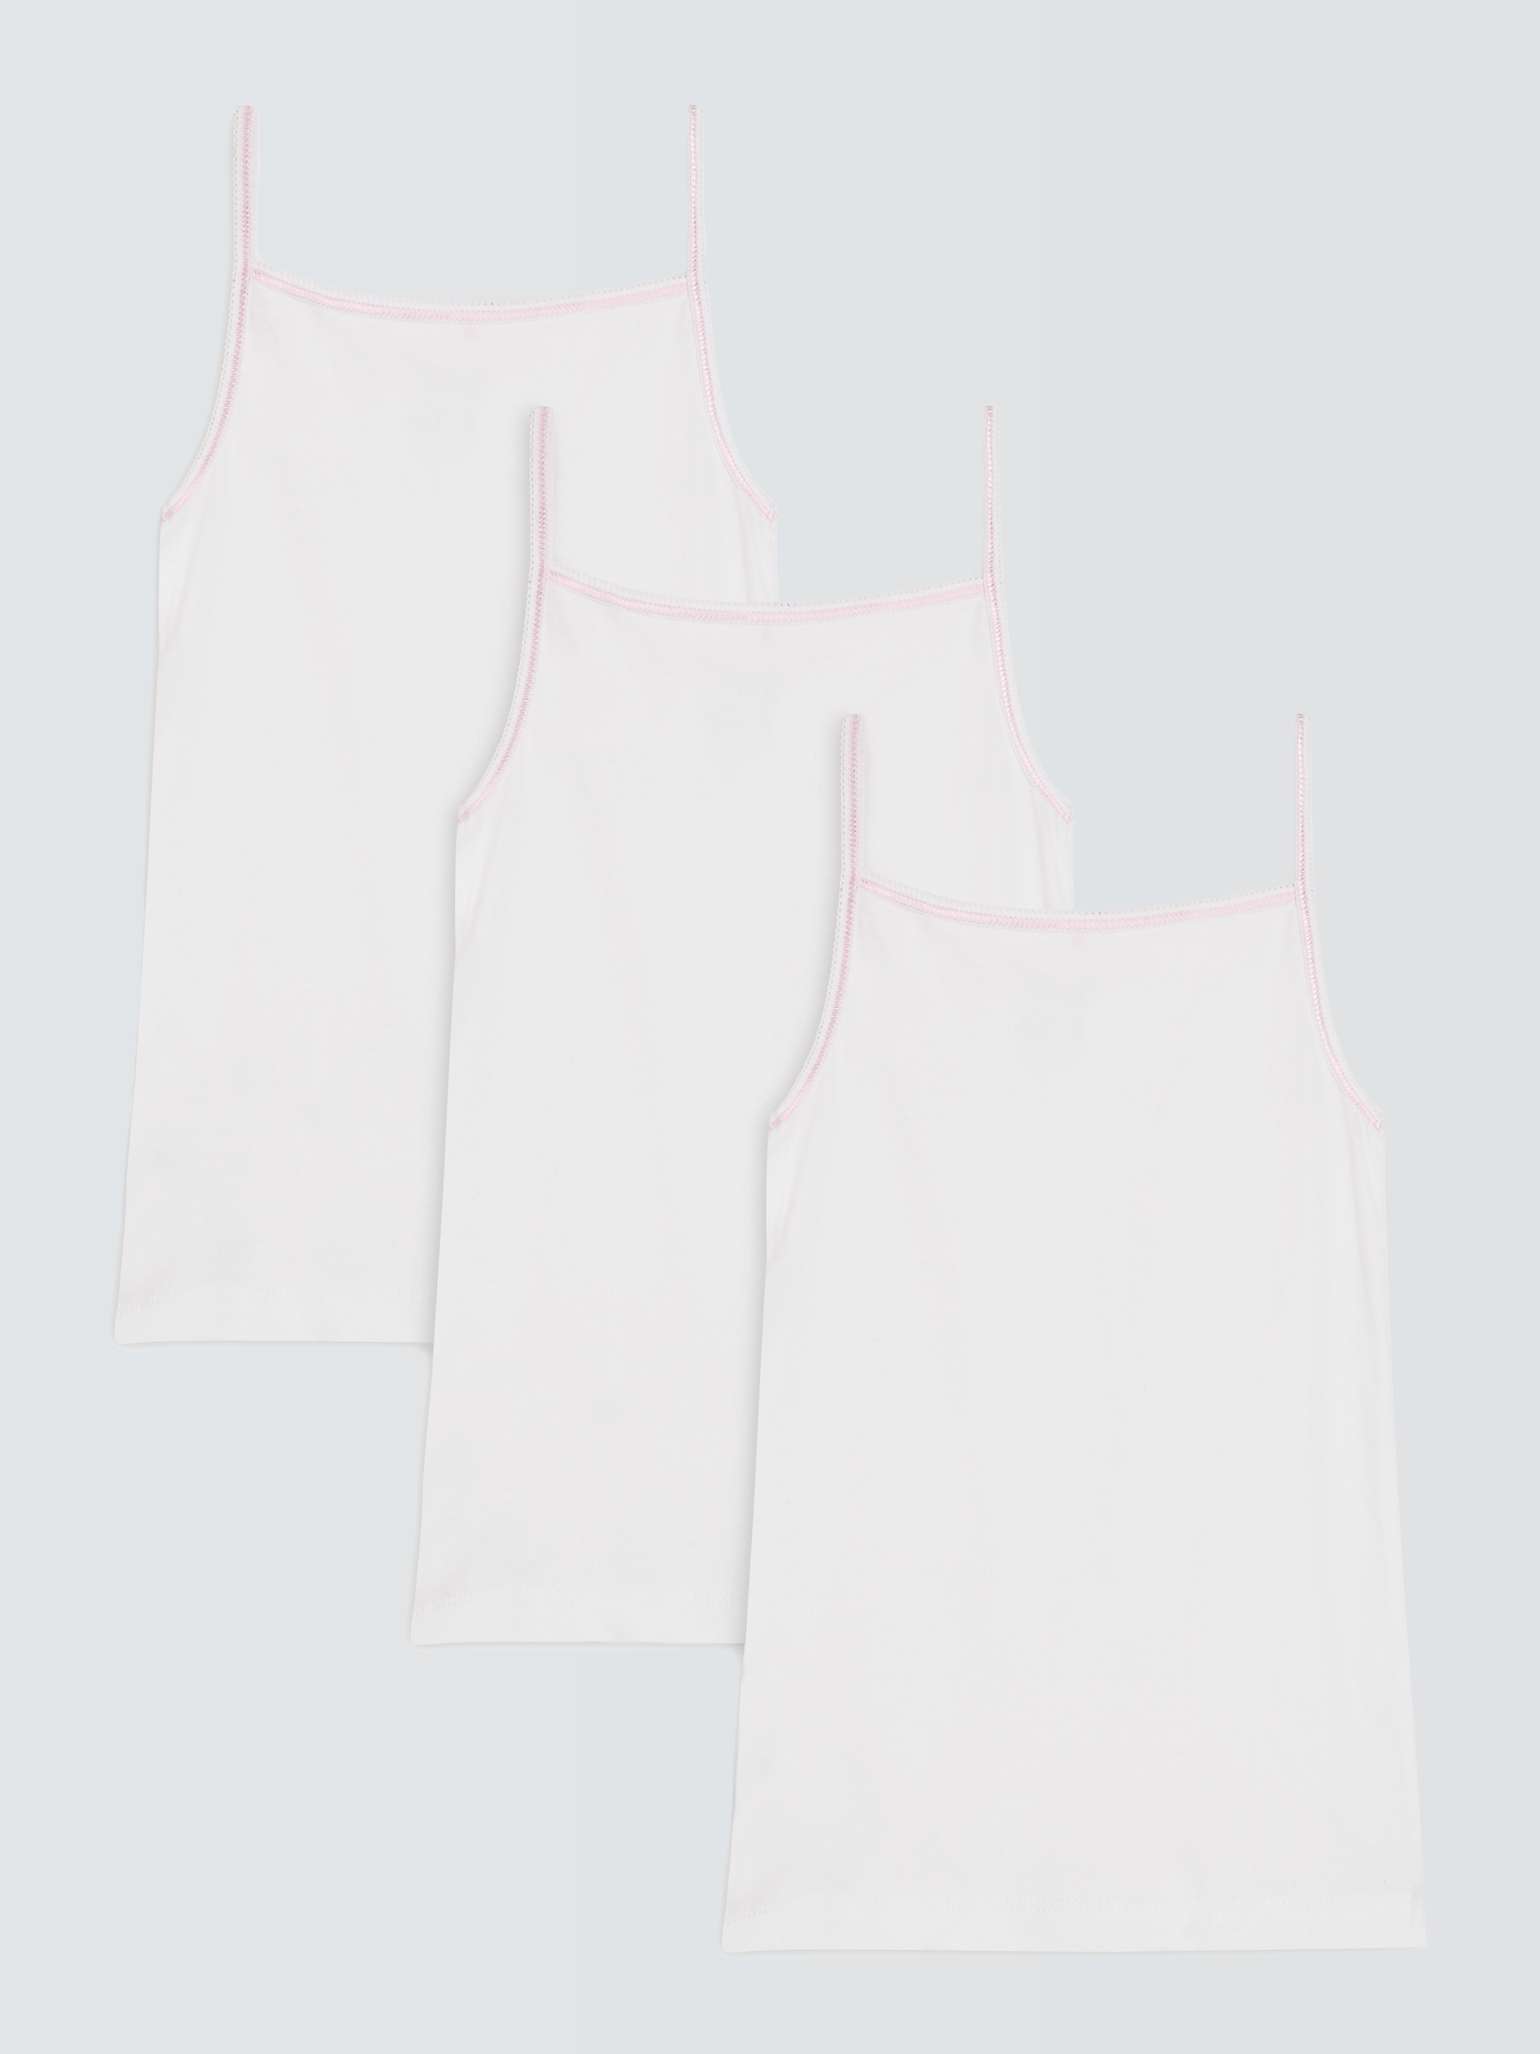 Buy John Lewis Kids' Embroidered Edge Camisole Vests, Pack of 3, White Online at johnlewis.com